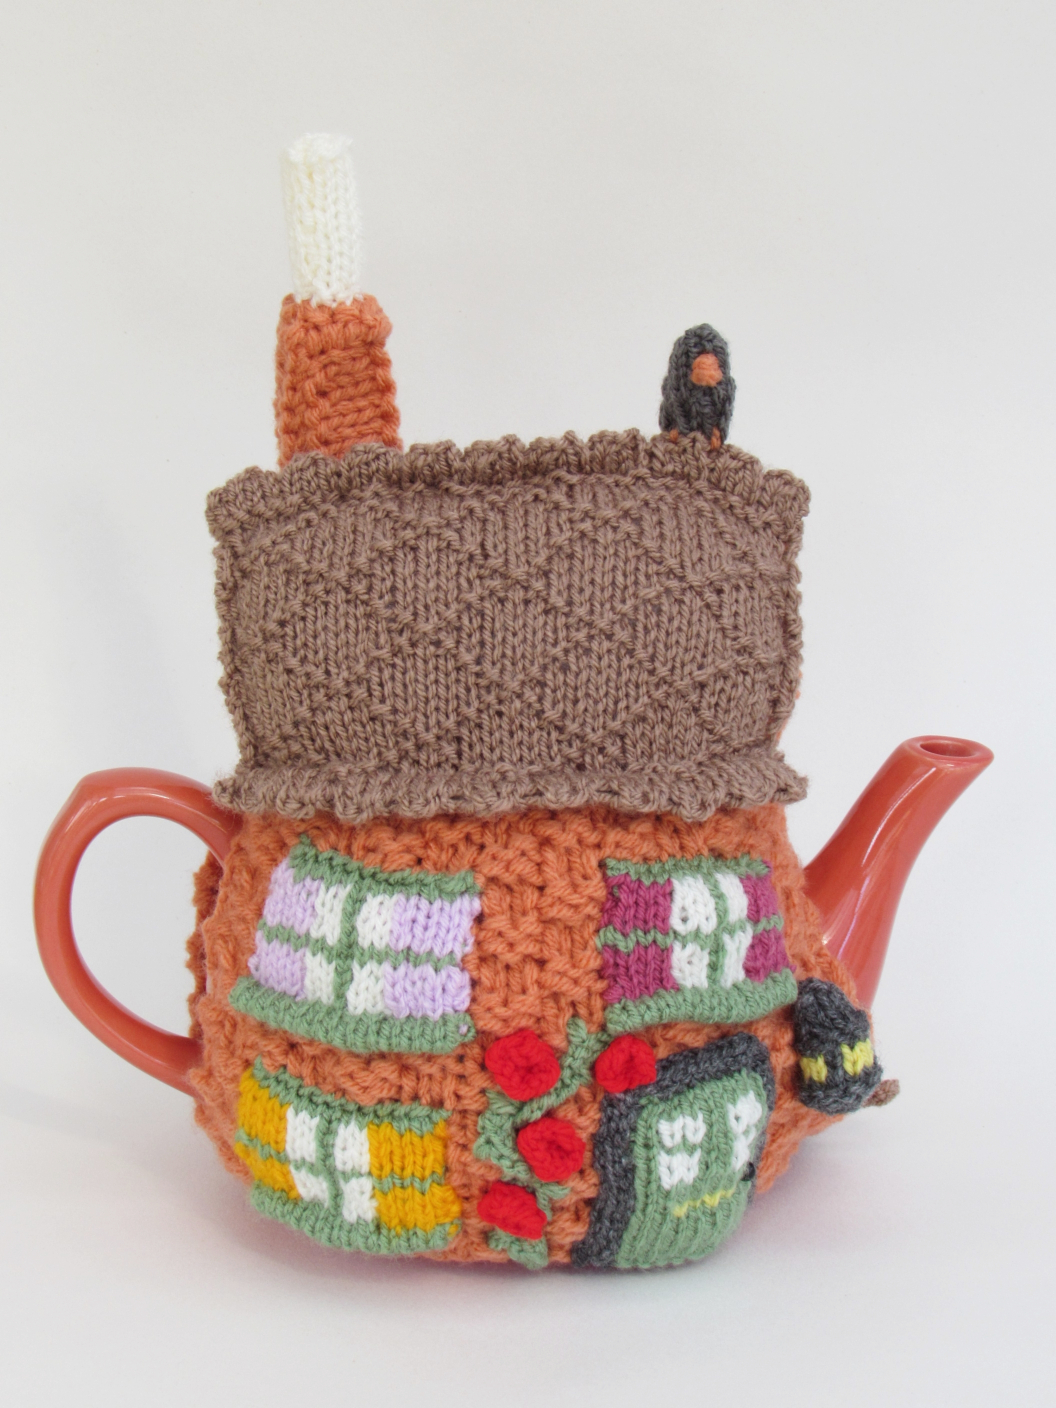 Tea Cosy Knitting Patterns from tea cosy folk, learn how to knit our